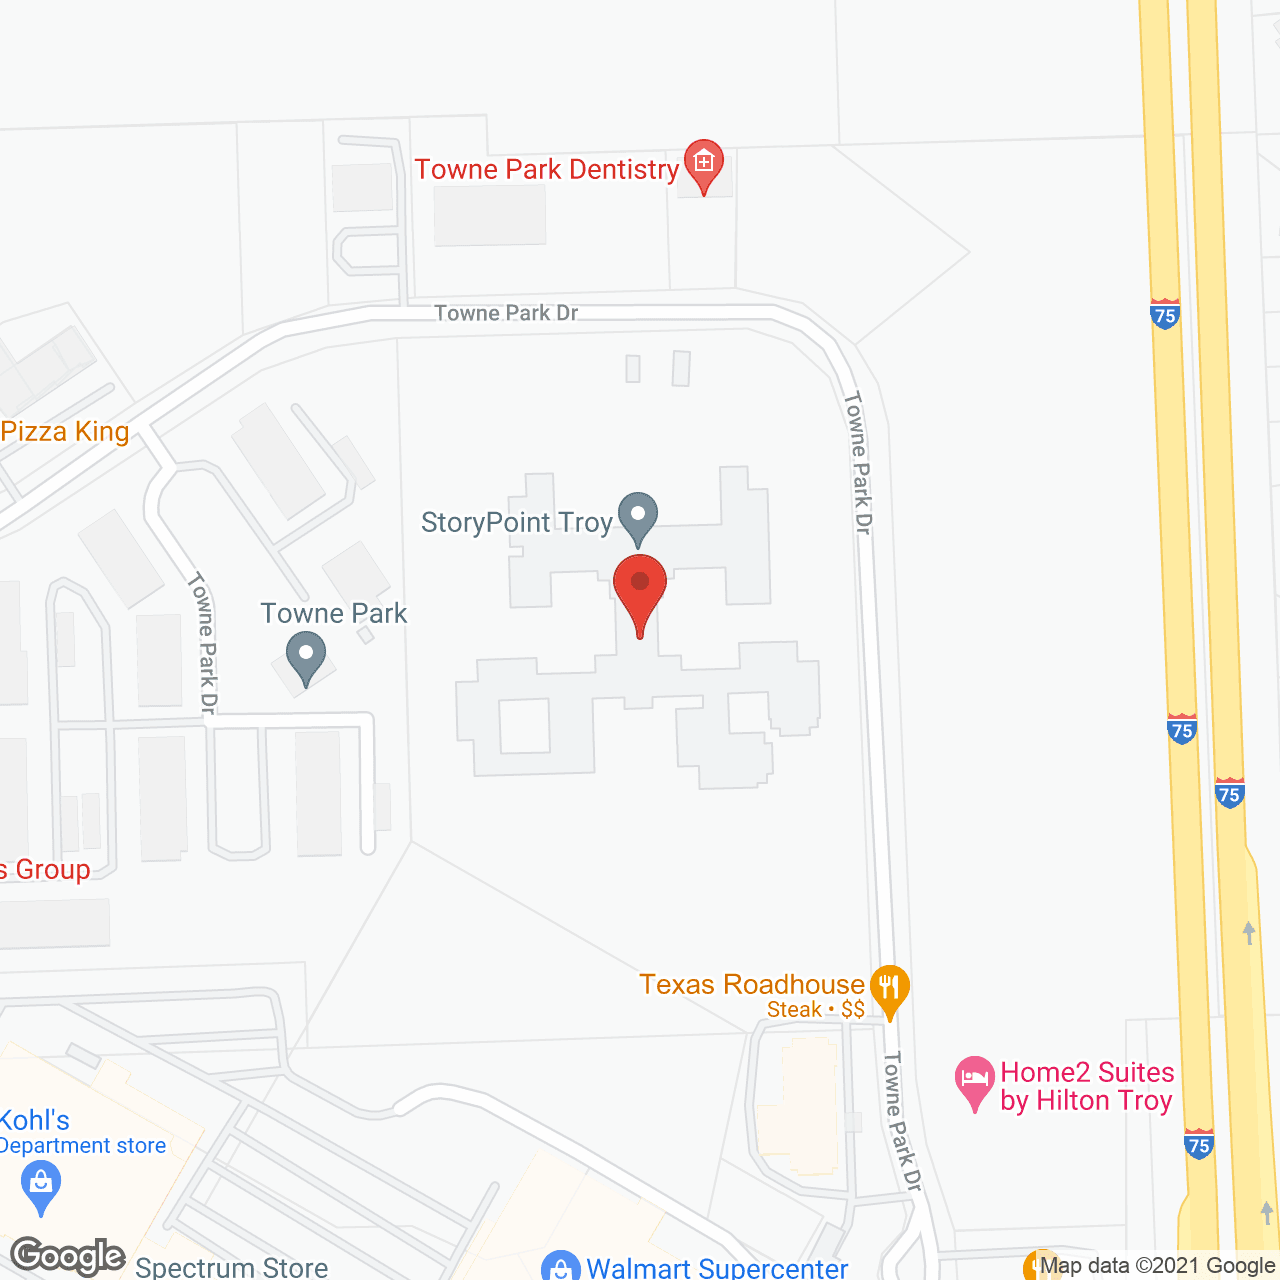 StoryPoint Troy in google map